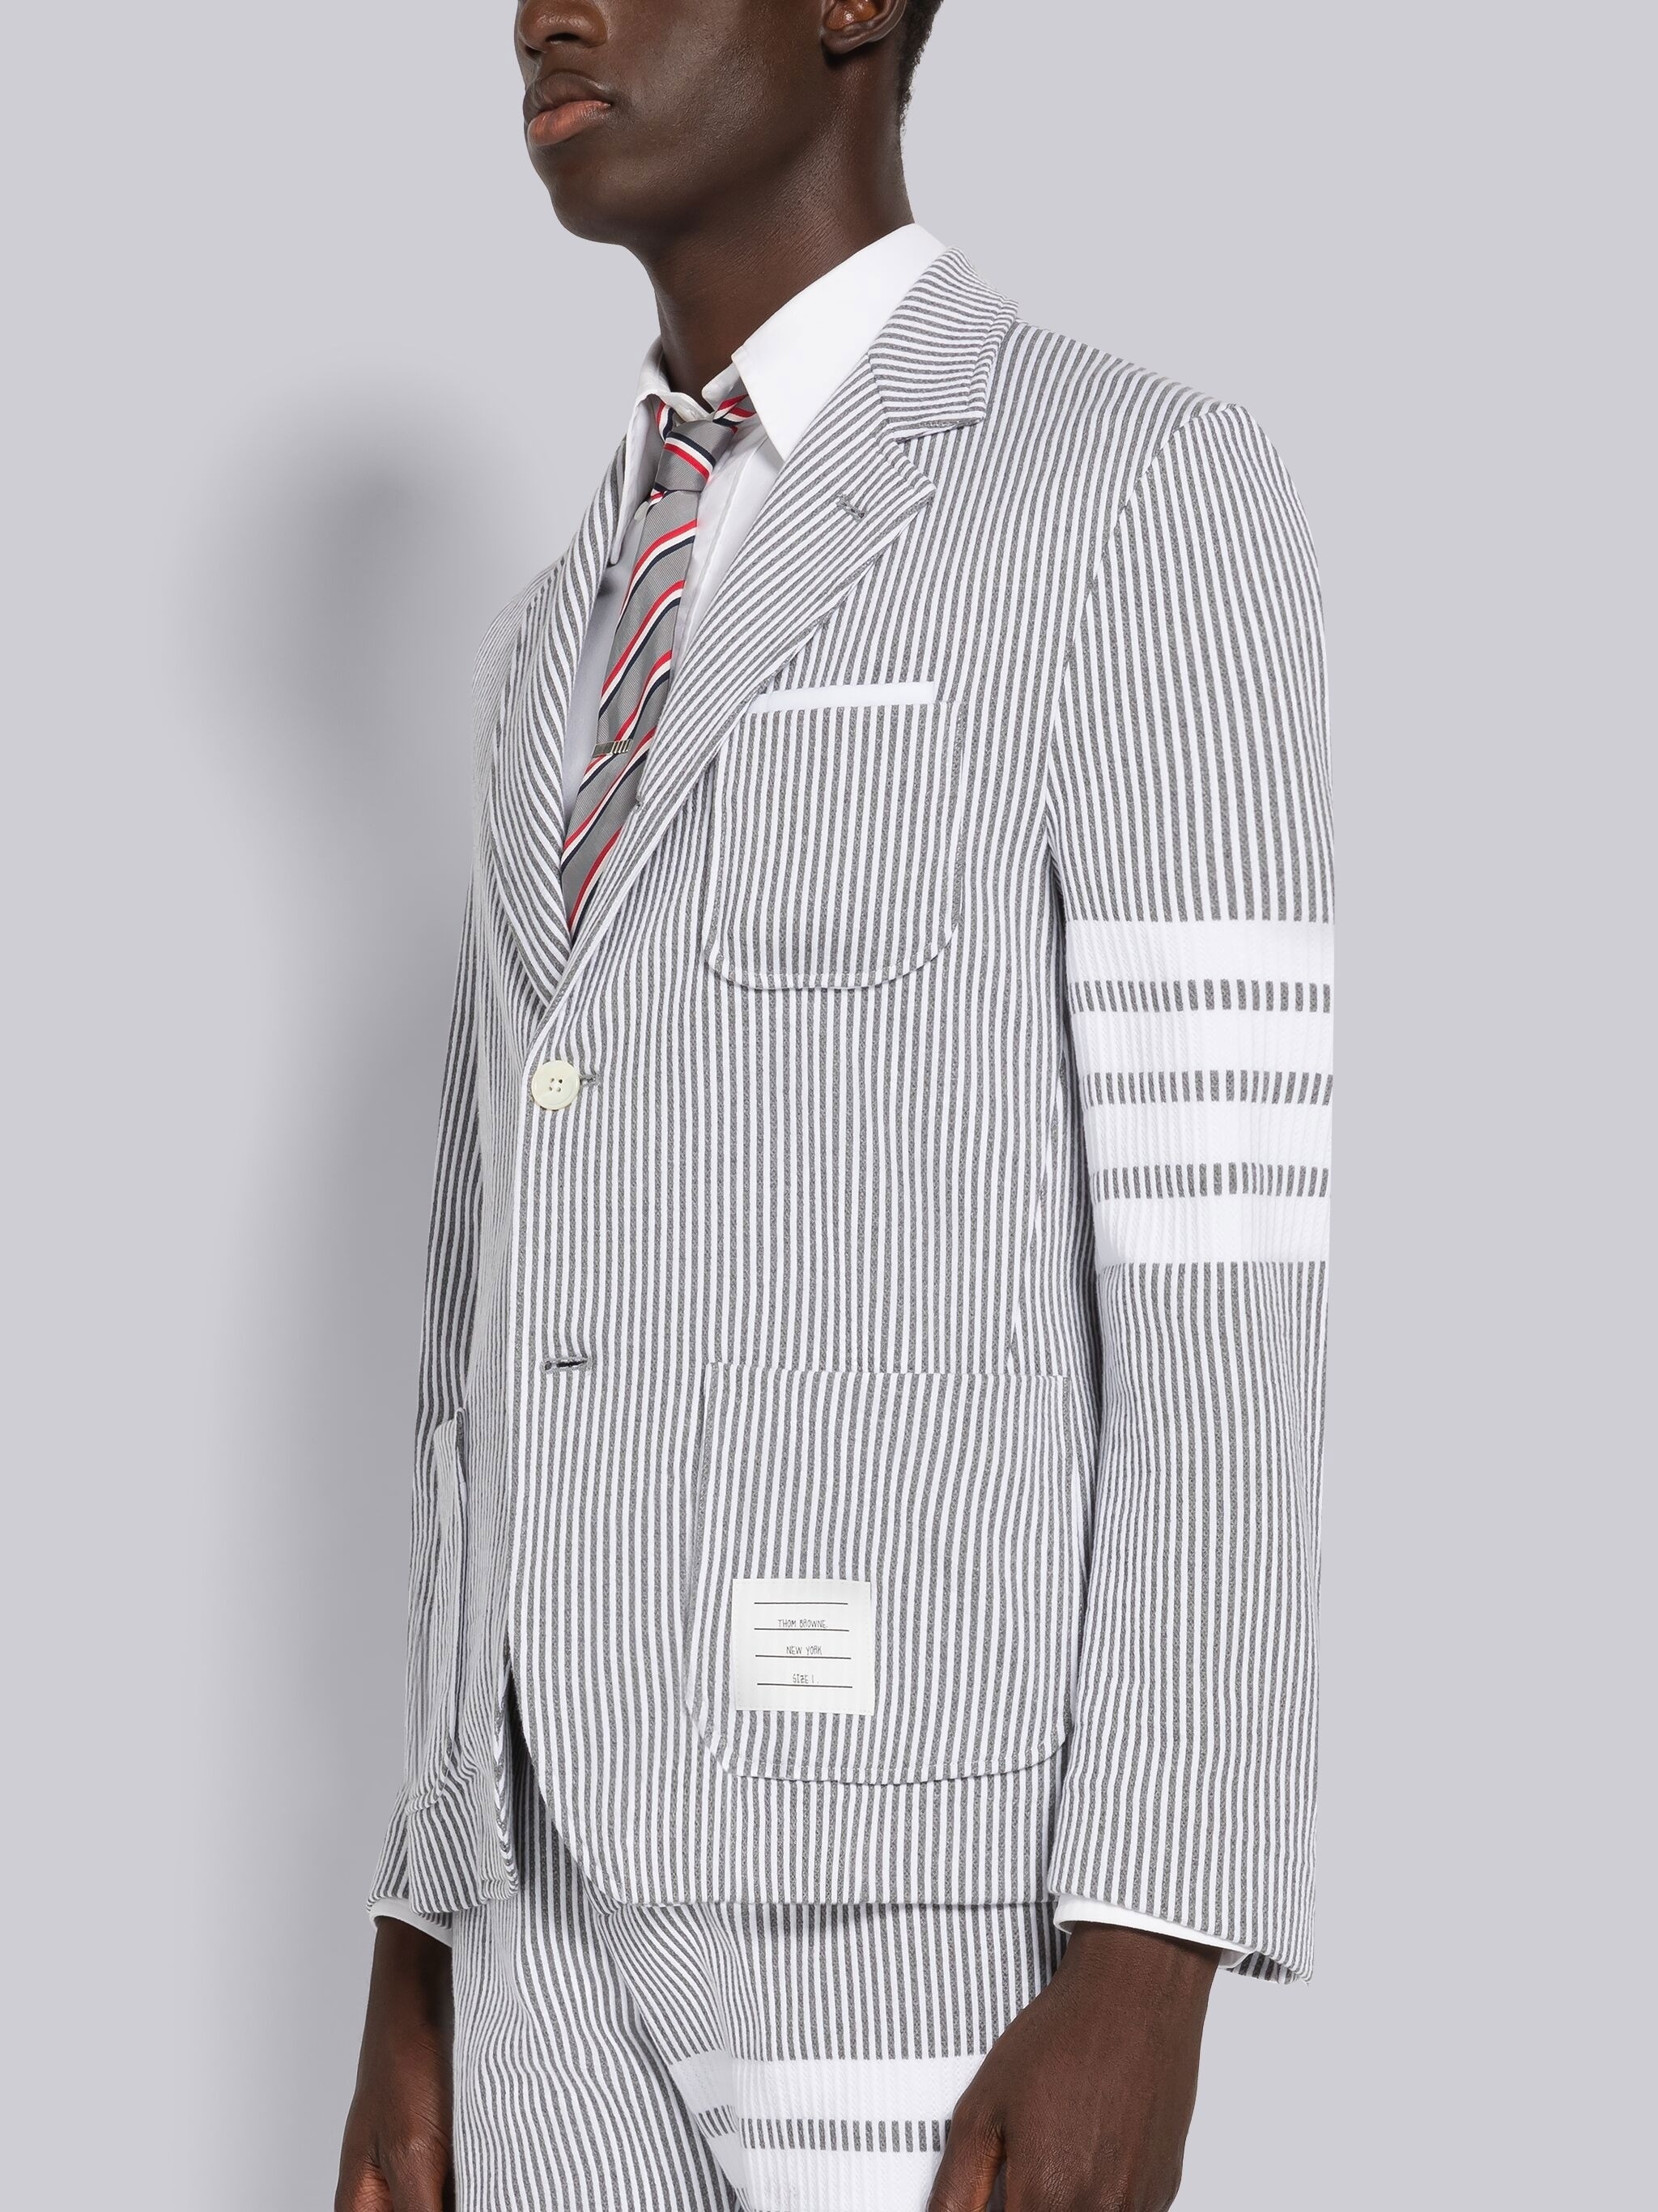 Thom Browne striped double-breasted jacket - Red